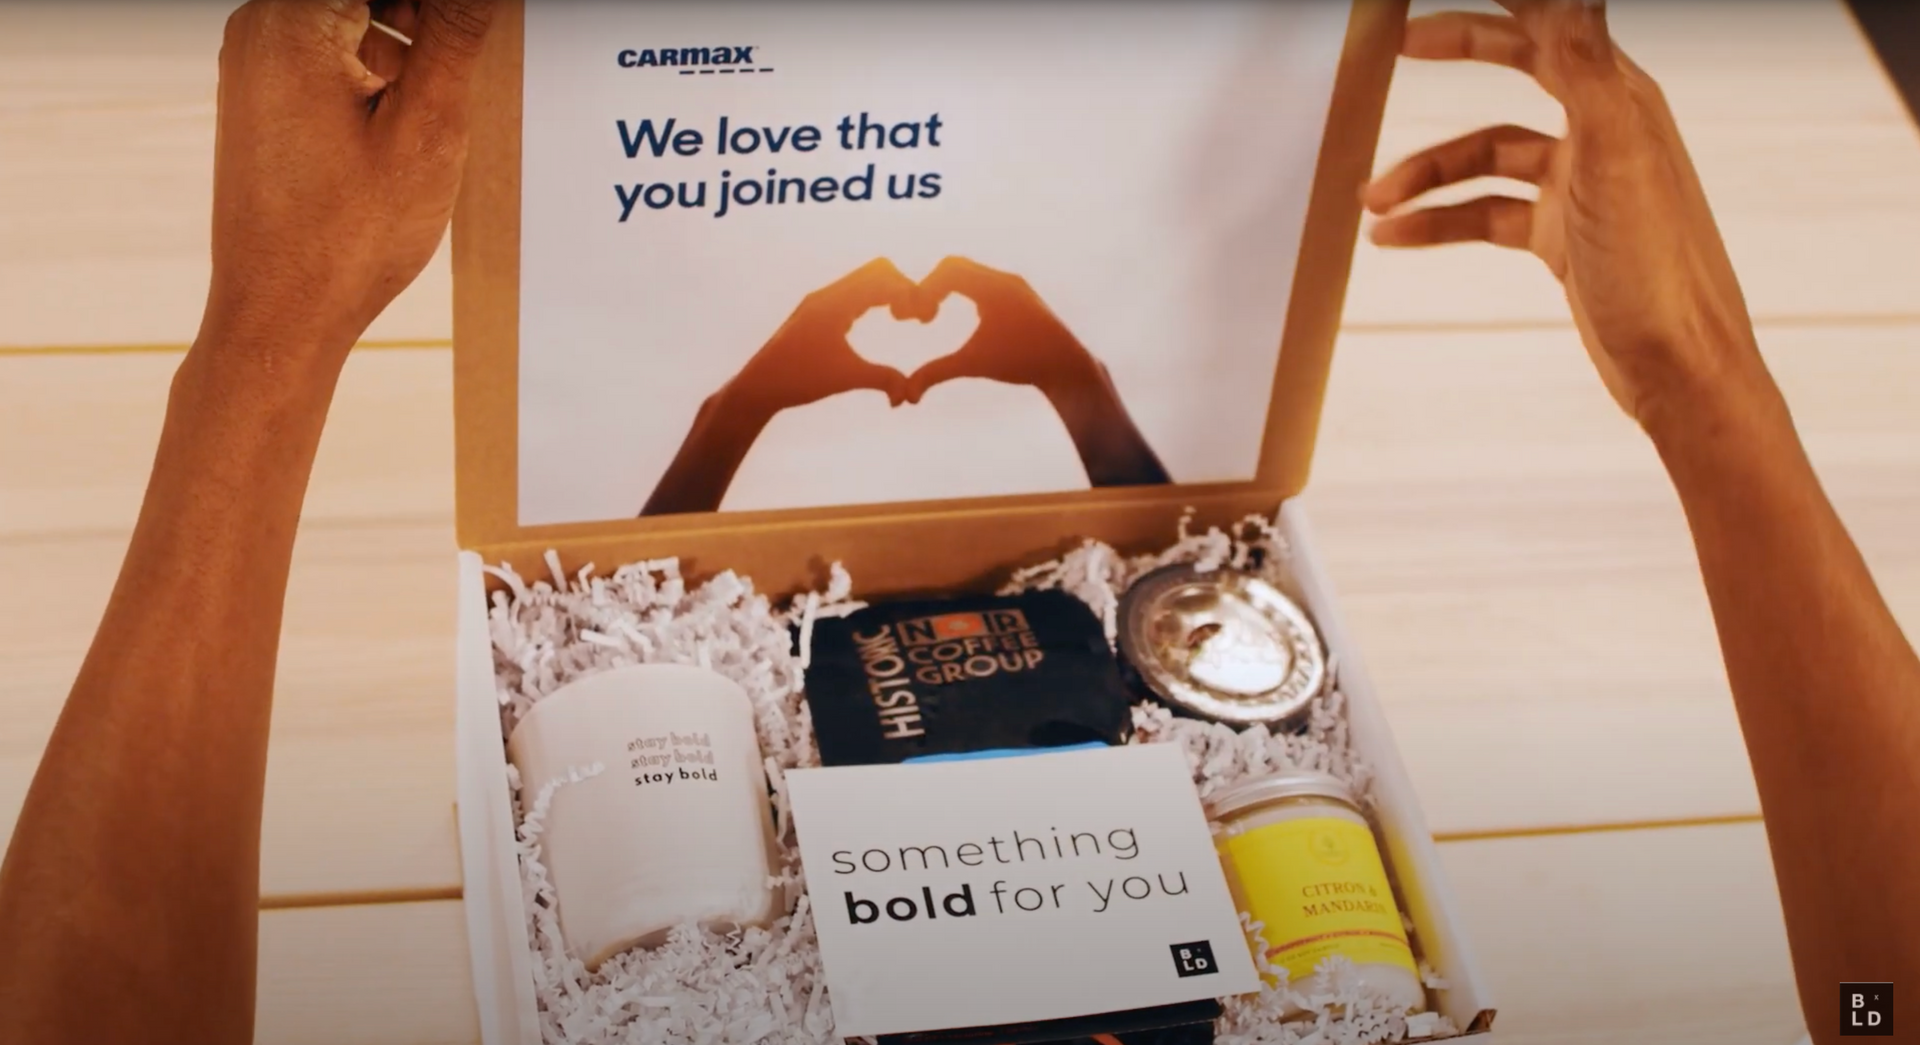 Load video: This Is Bold Xchange introductory video describing the corporate gifting work Bold Xchange has done for CarMax, Hashicorp, and other organizations, as told by HR and DEI leaders there.